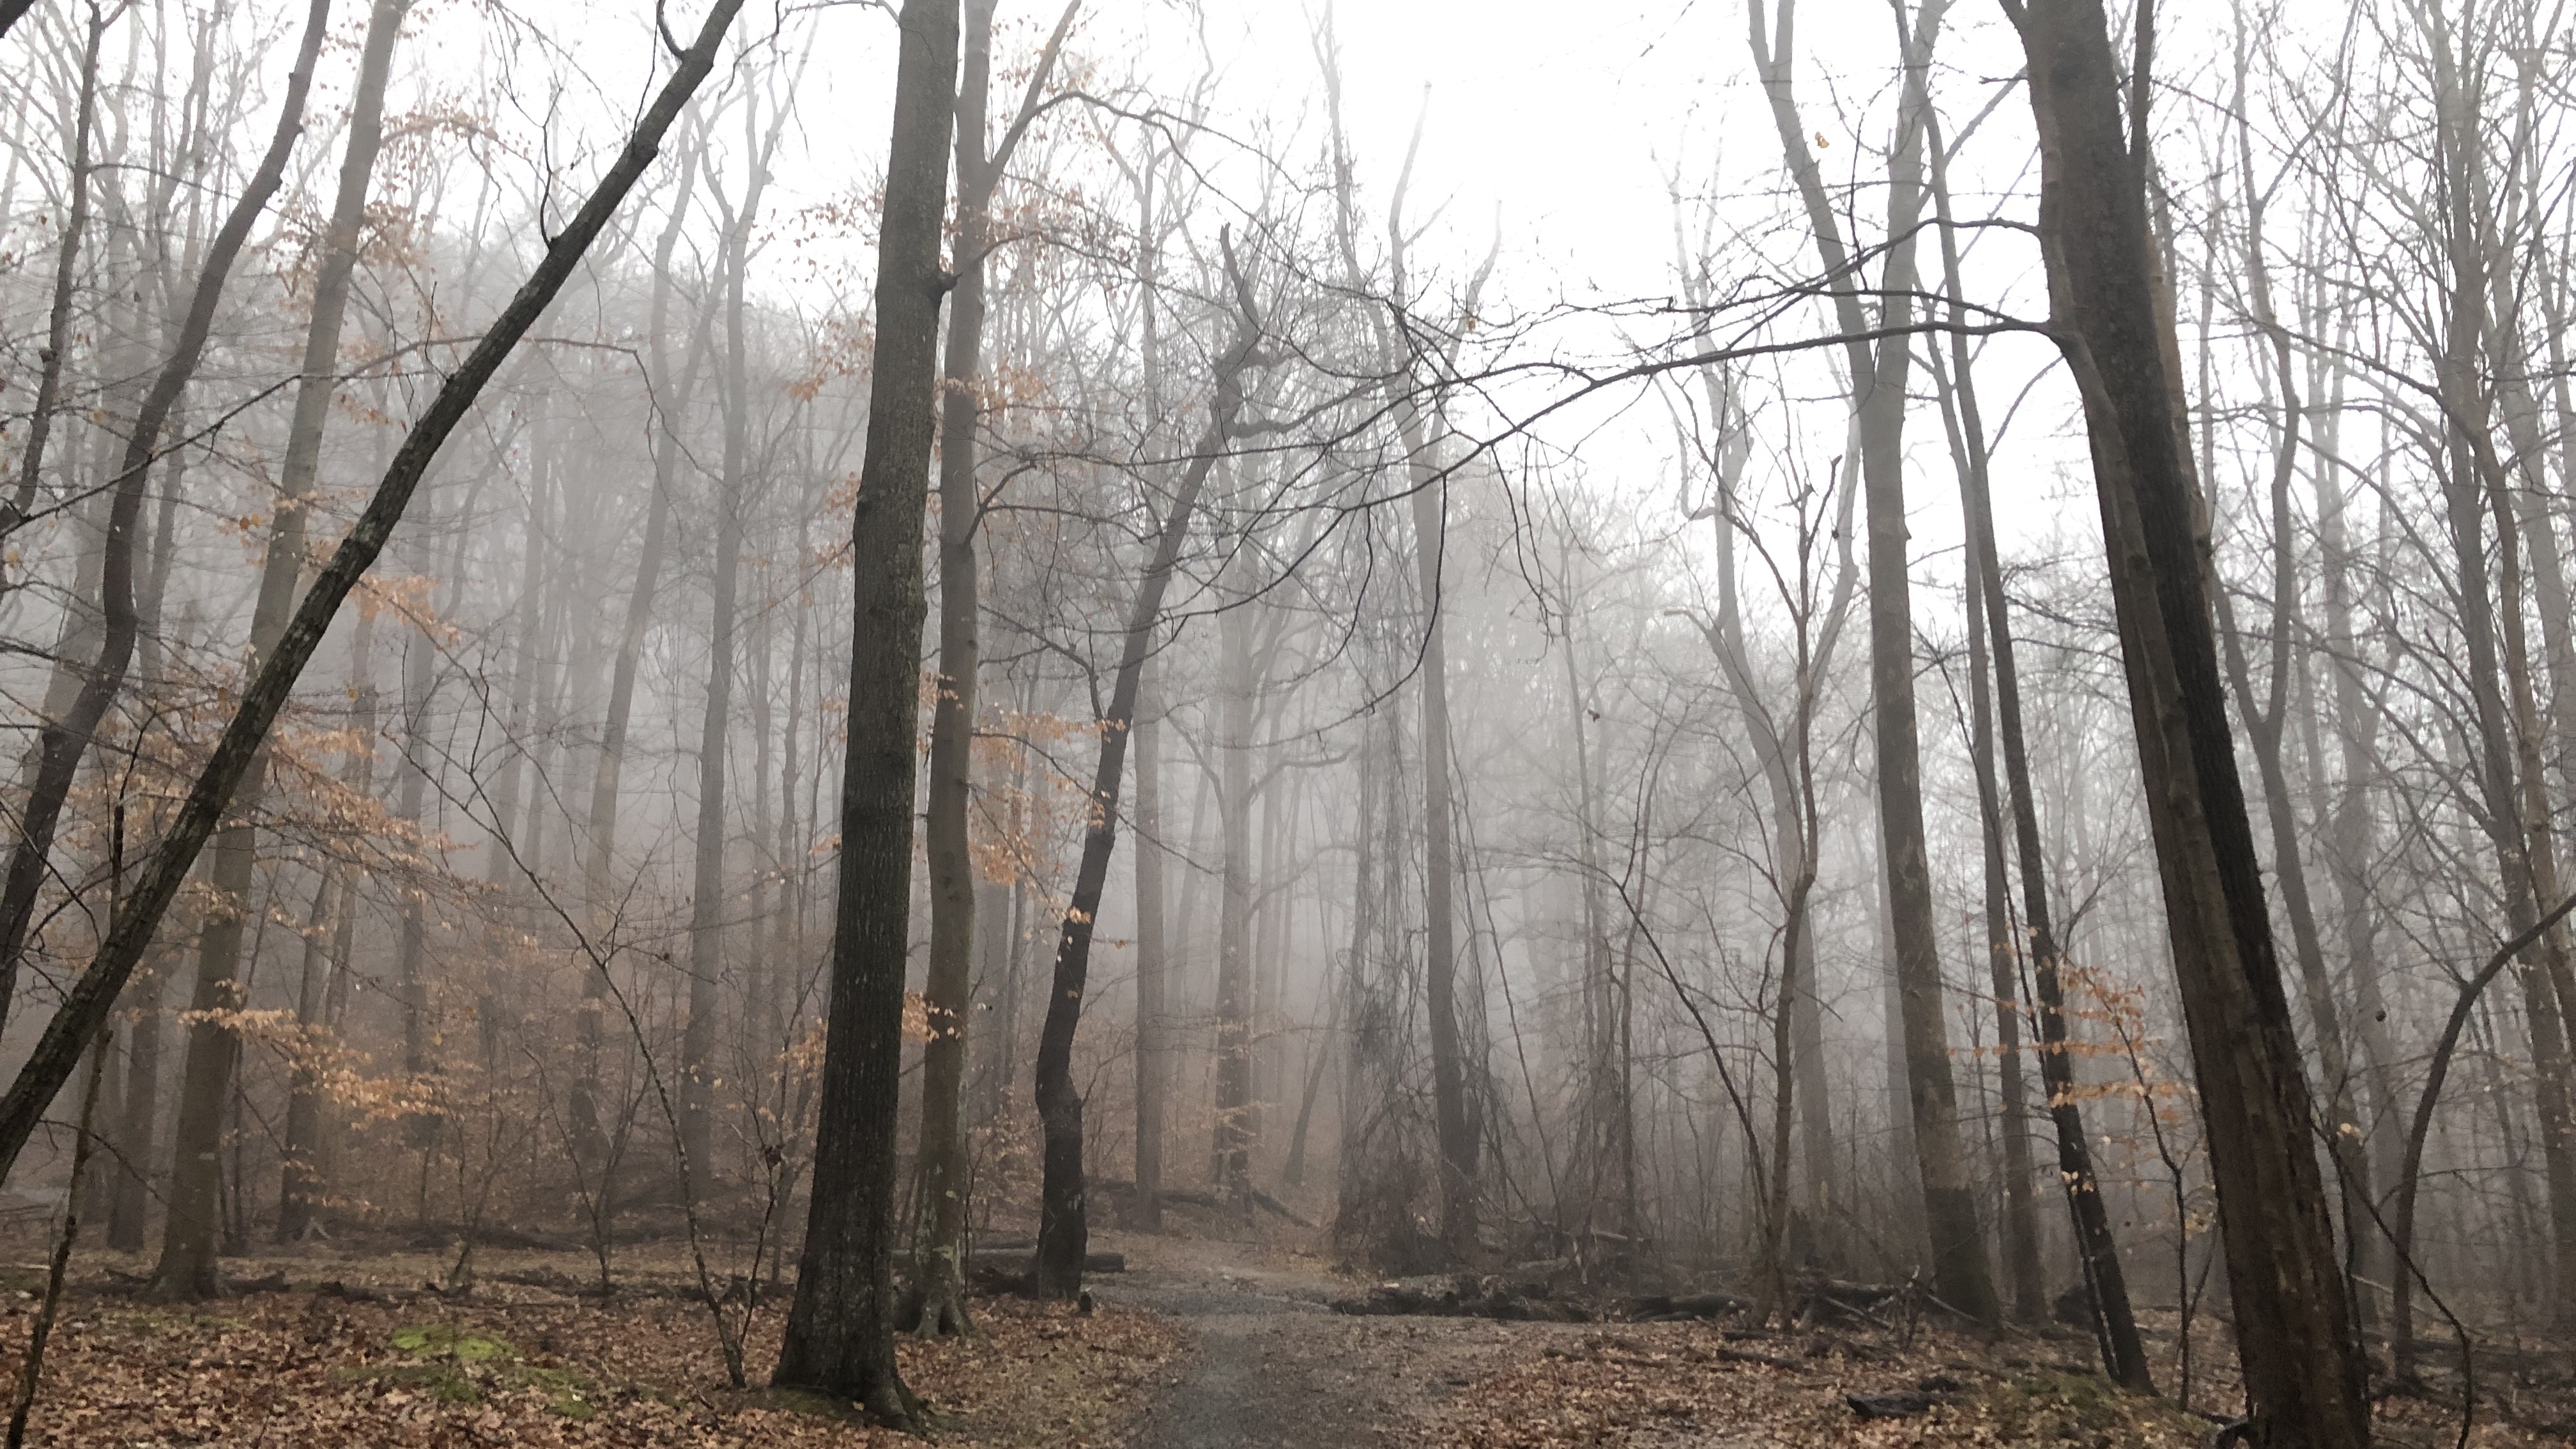 Forest bathing in Herndon, Reston, and Sterling VA.